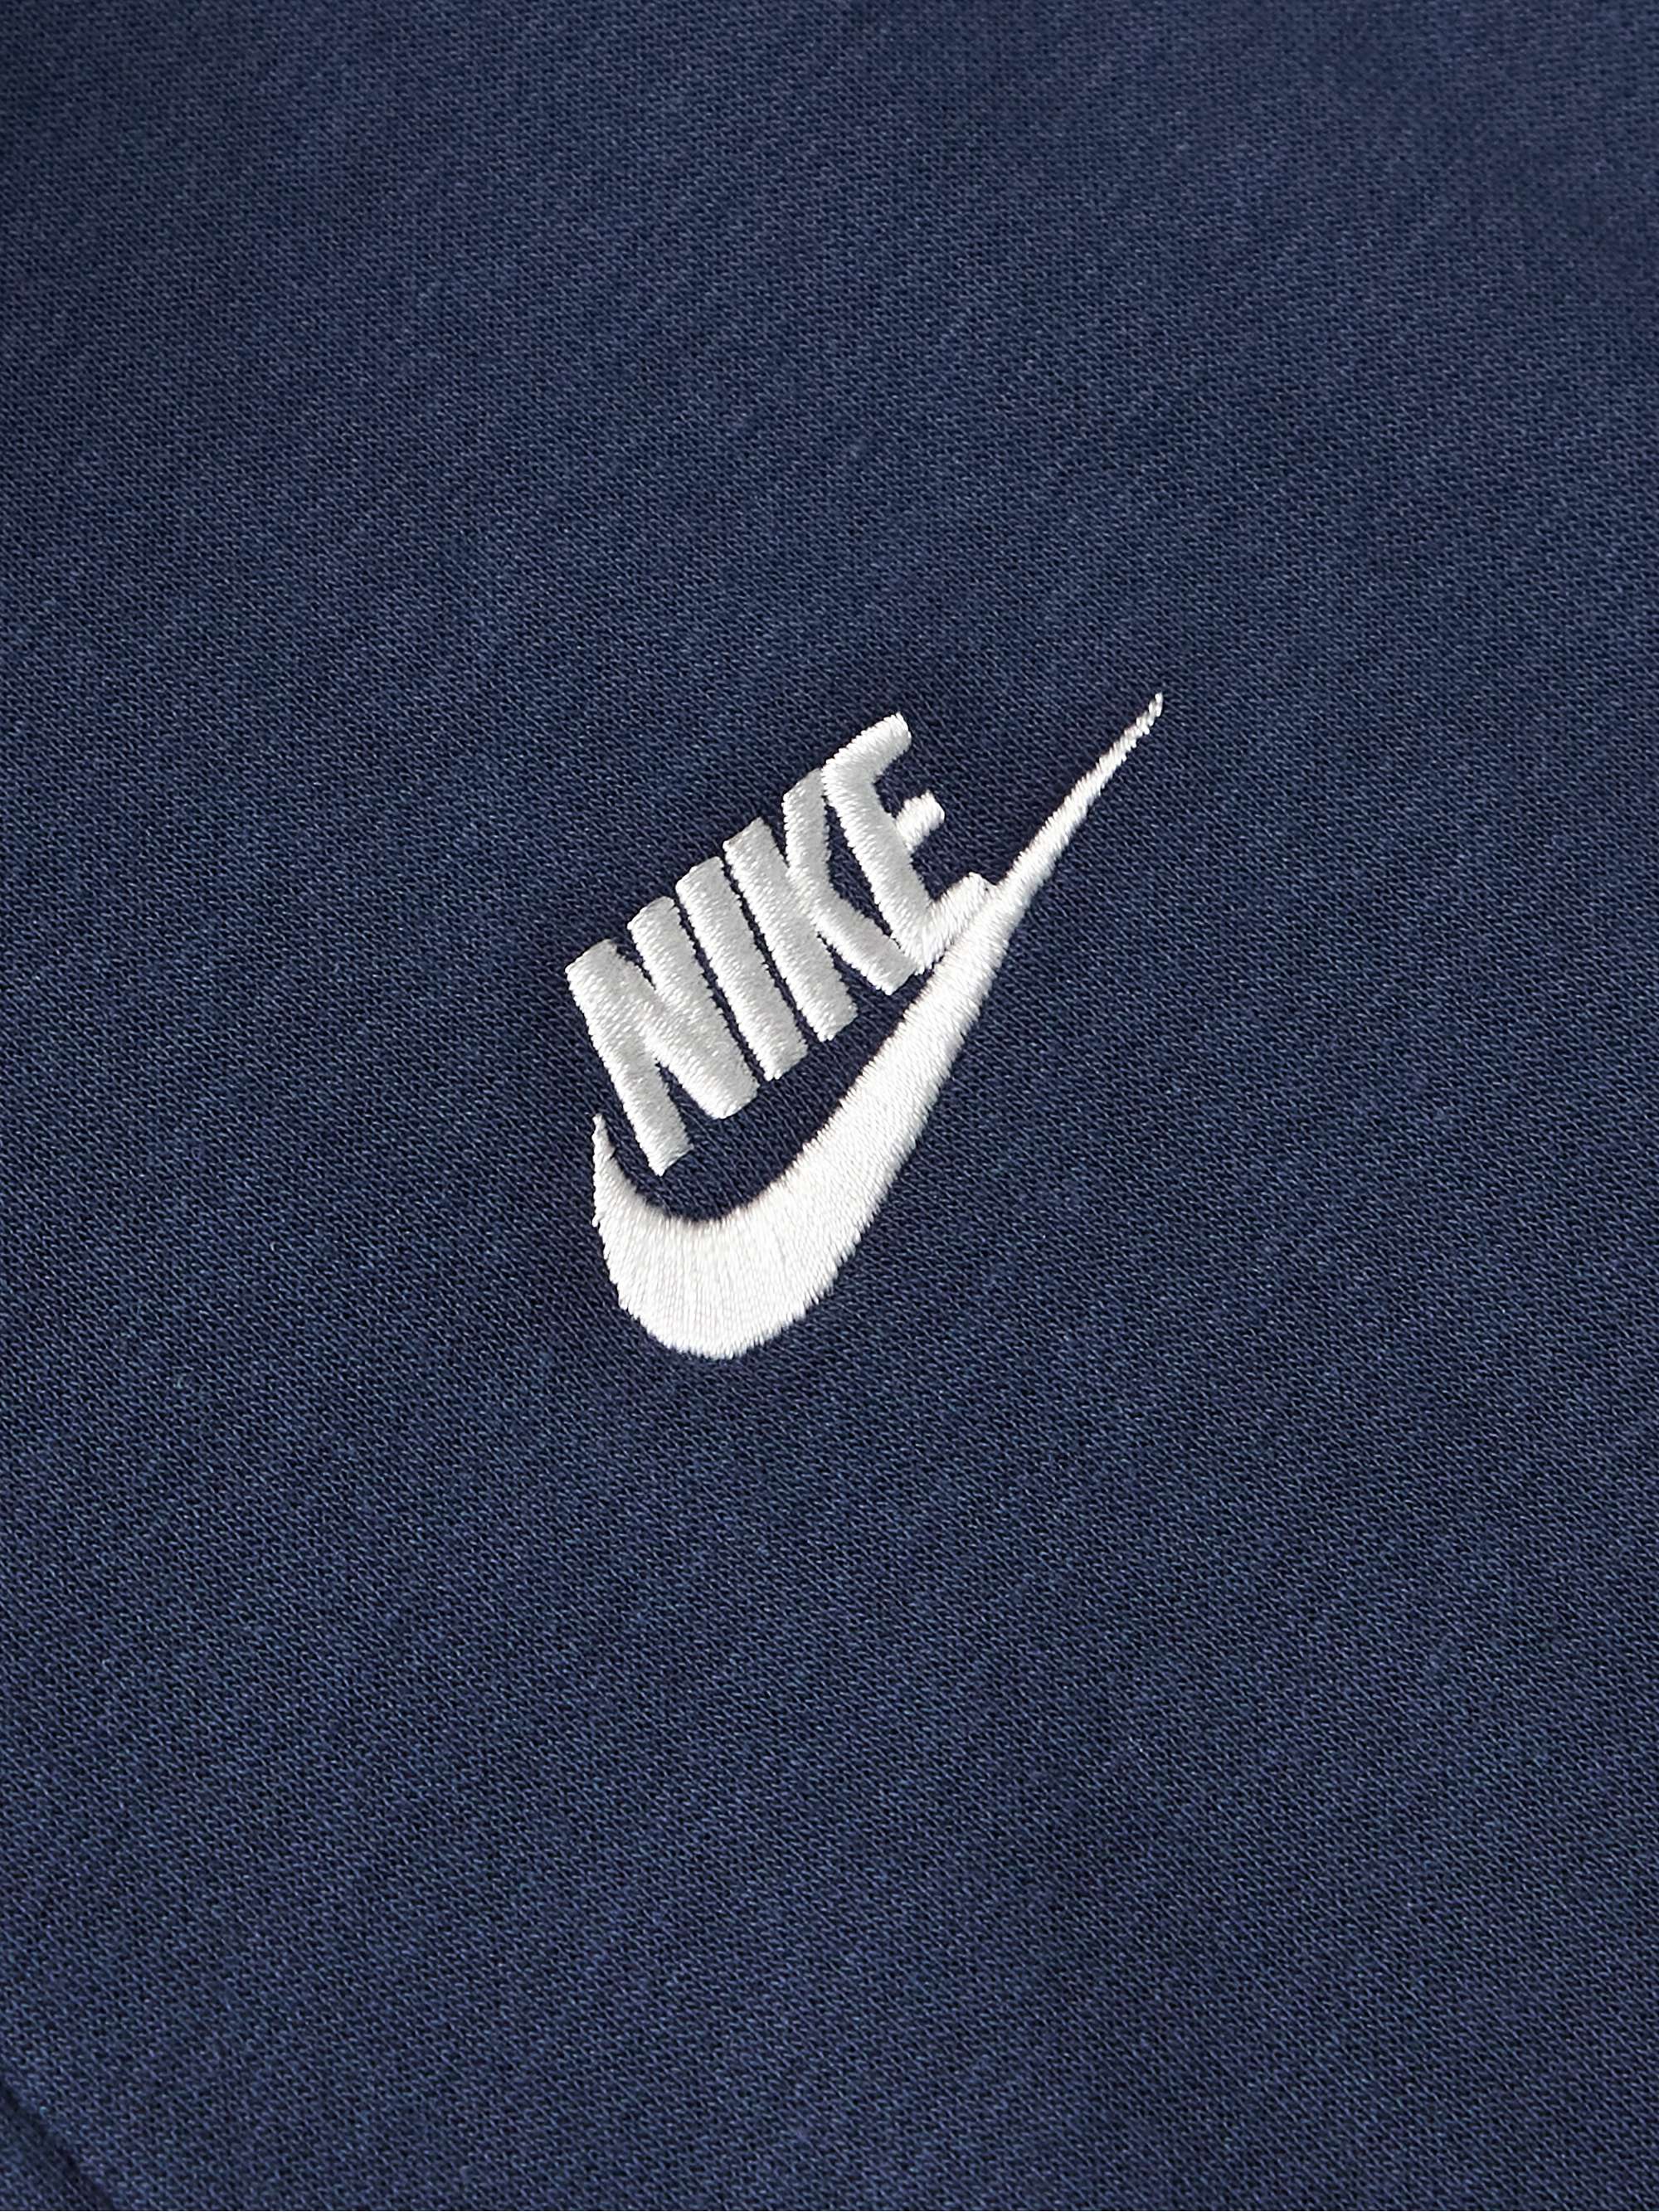 NIKE Sportswear Club Logo-Embroidered Cotton-Blend Jersey Zip-Up Hoodie